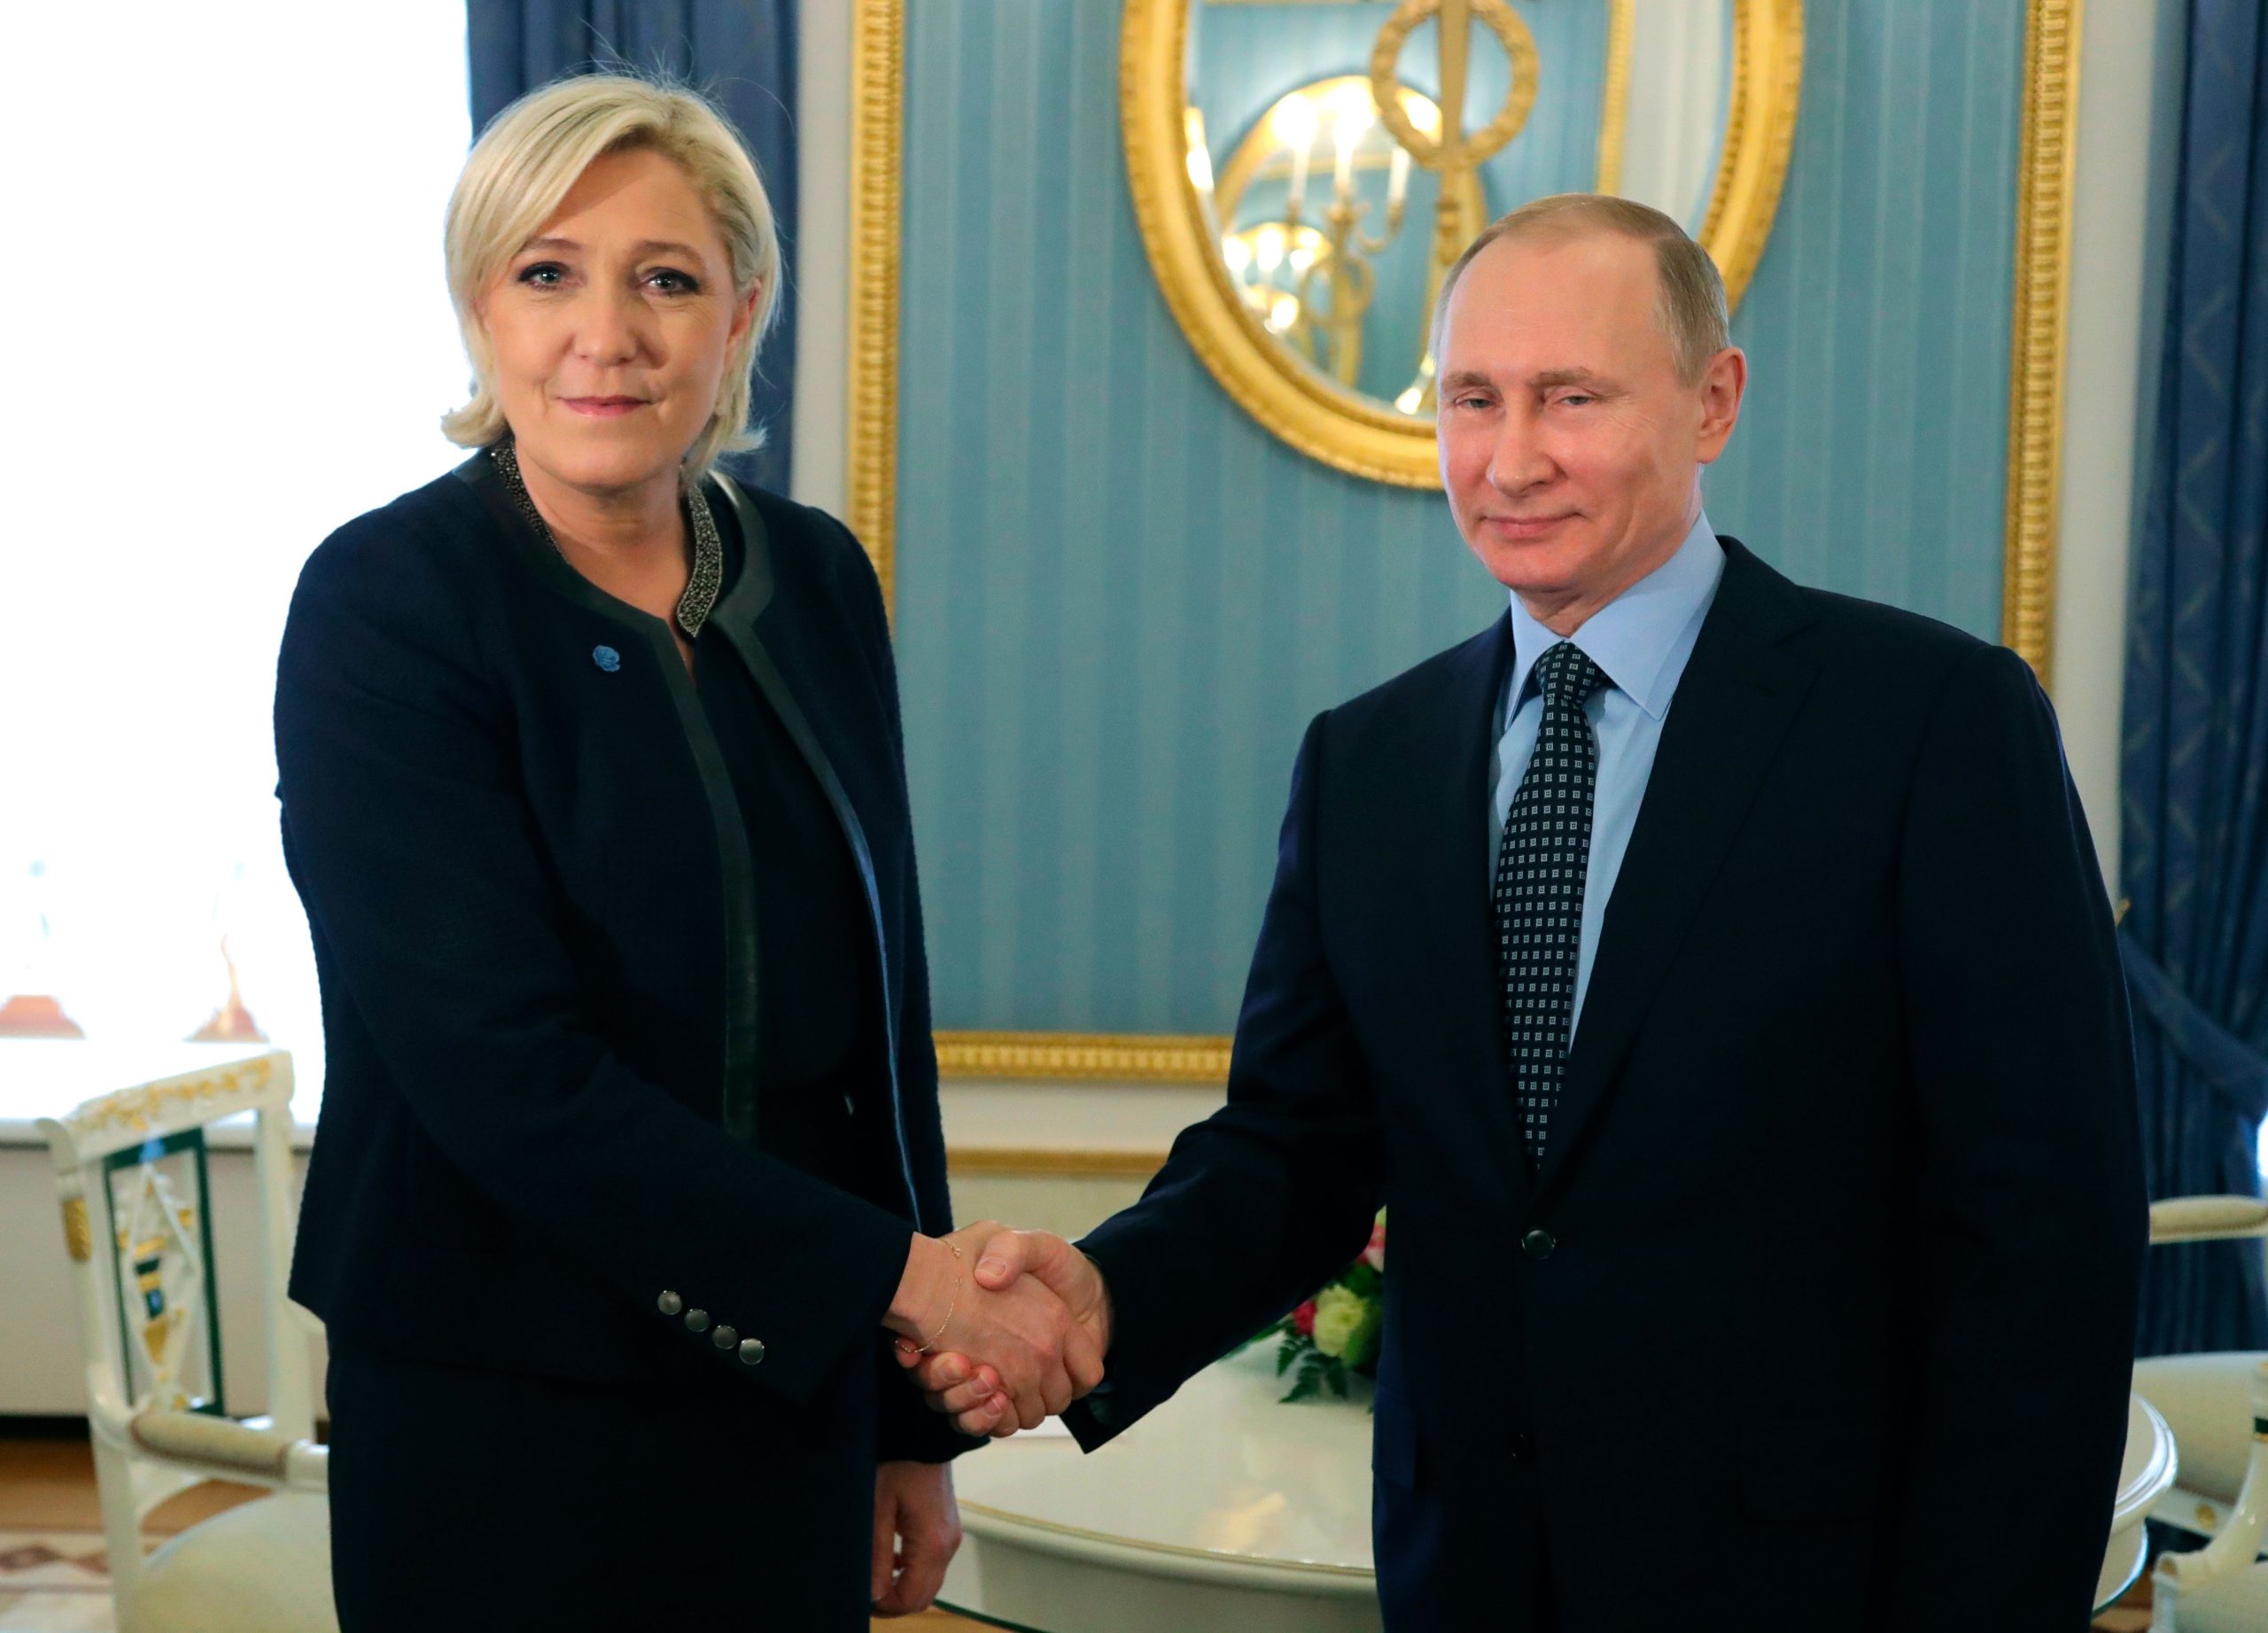 Explained: How the 2022 French presidential election could impact Ukraine war